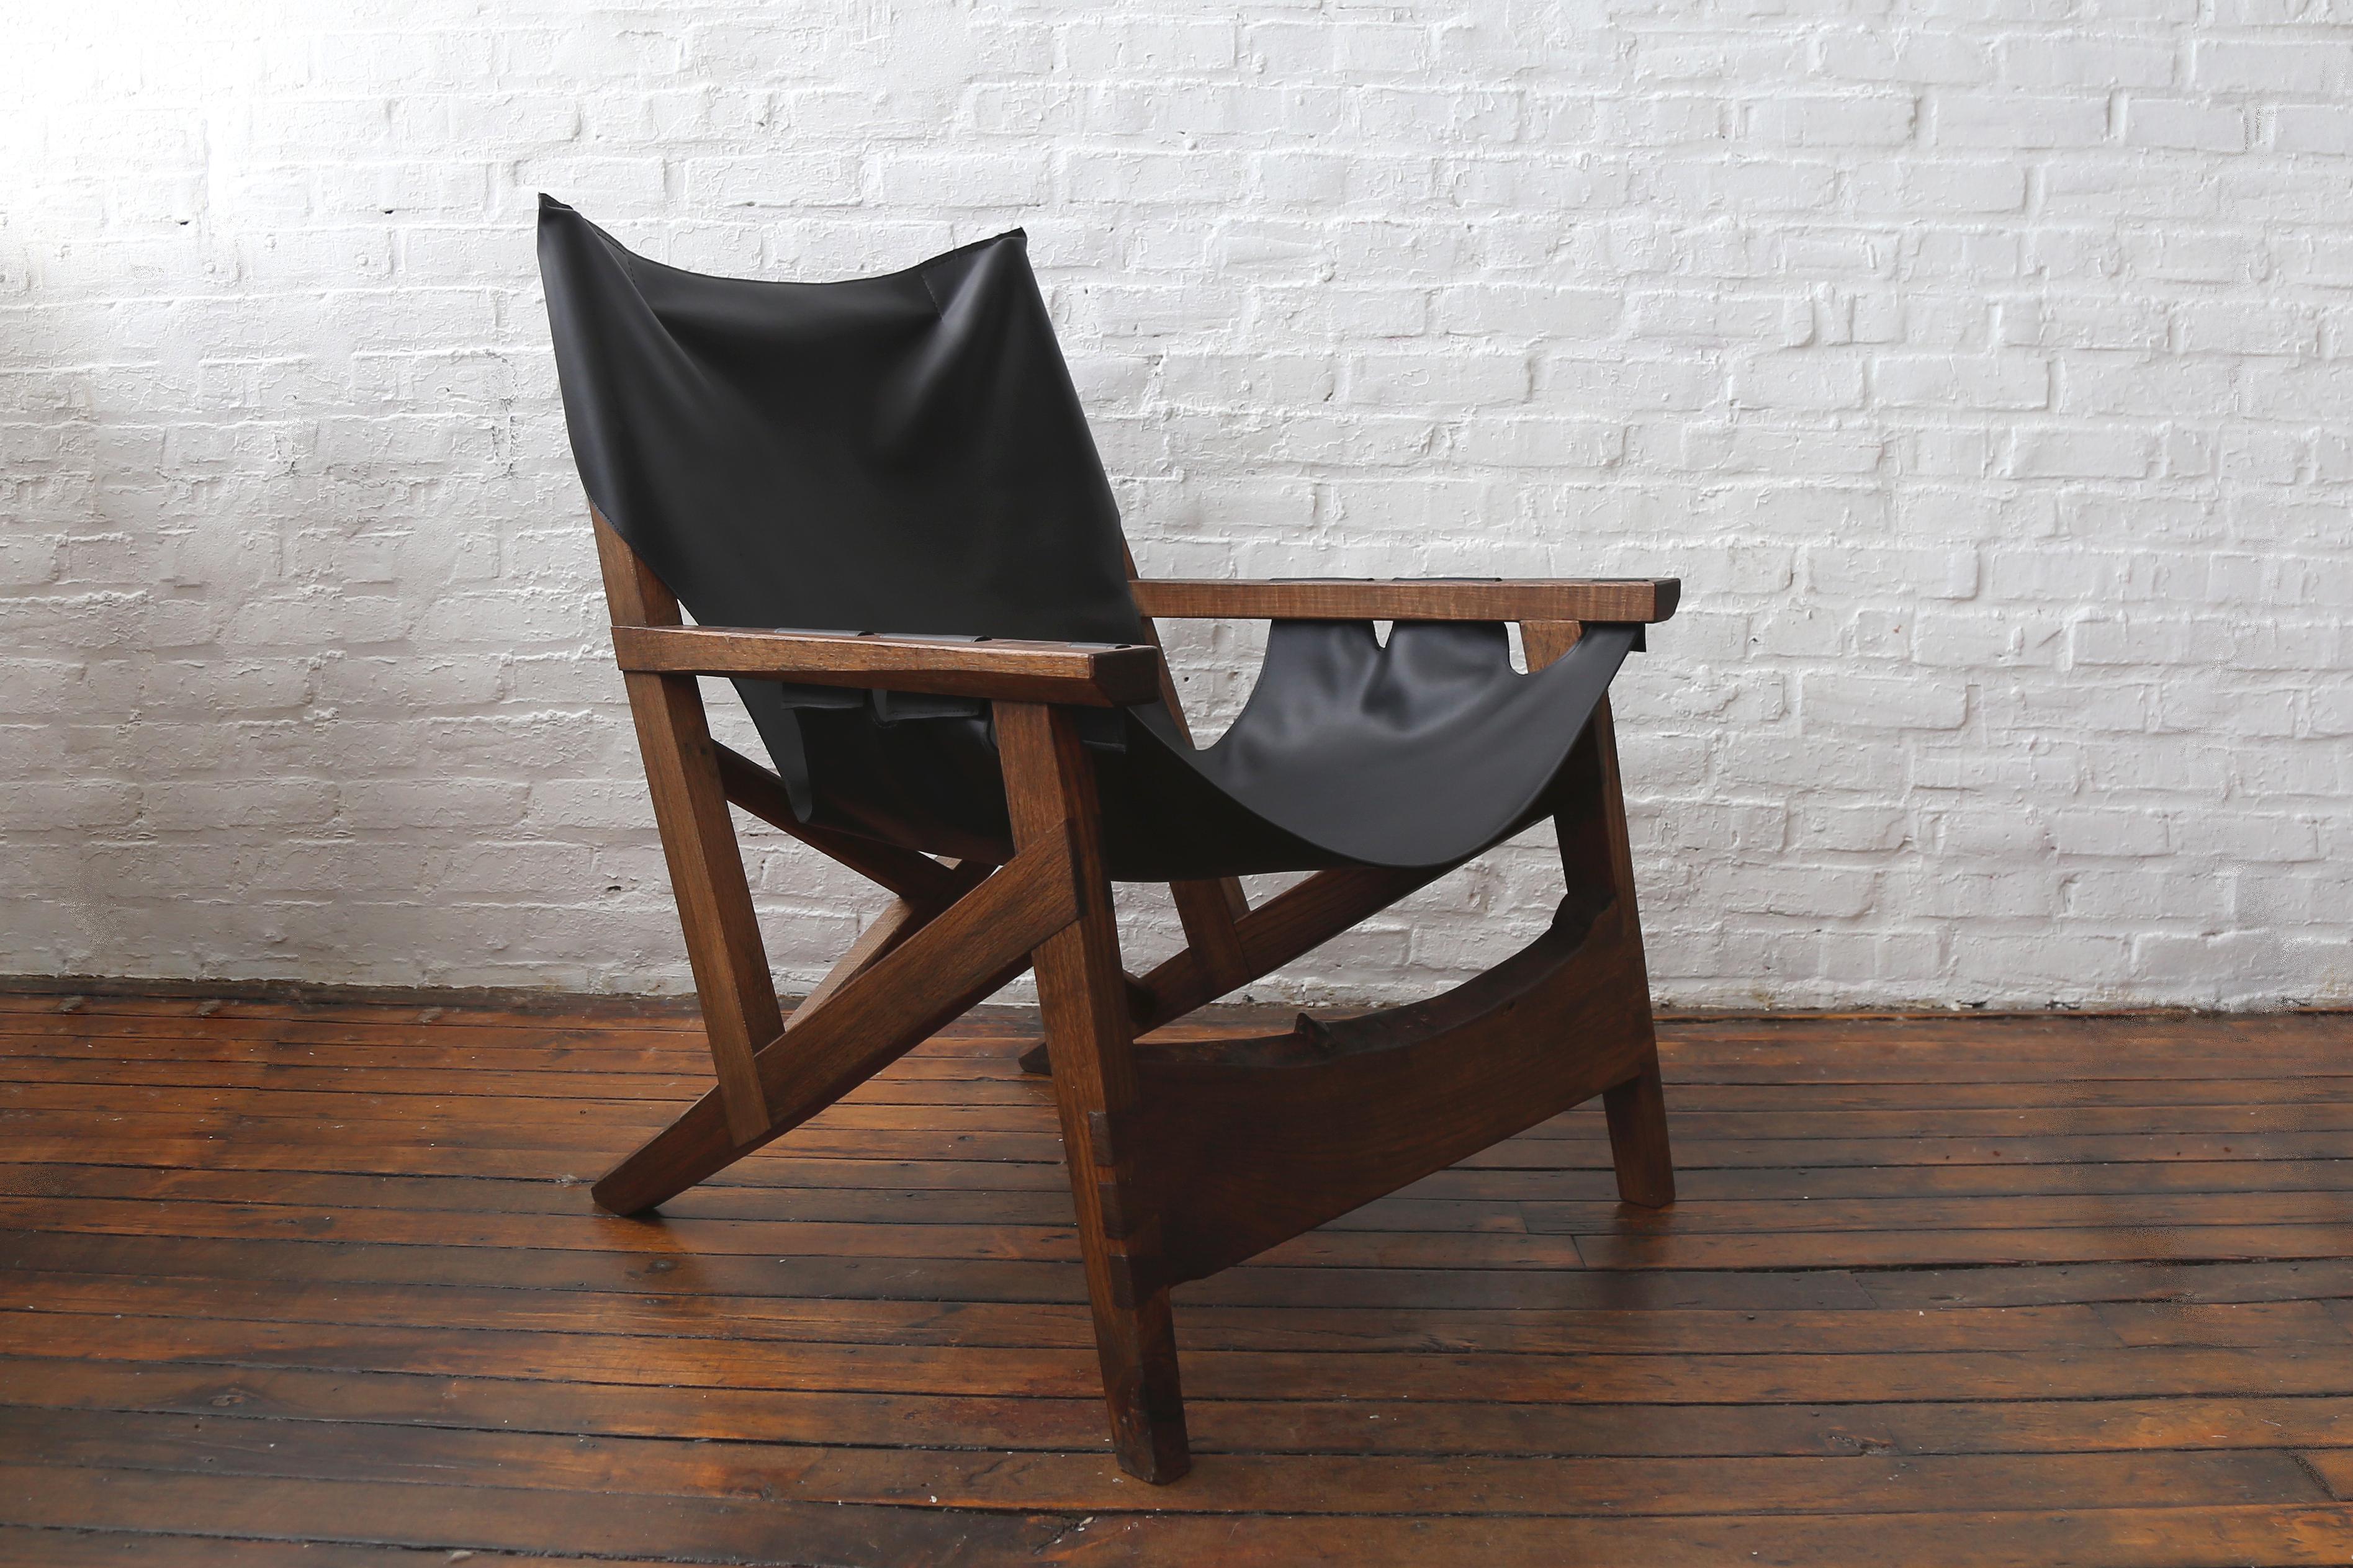 Fuugs Sling Chair Blackened Oak with Cactus Leather Sling For Sale 1